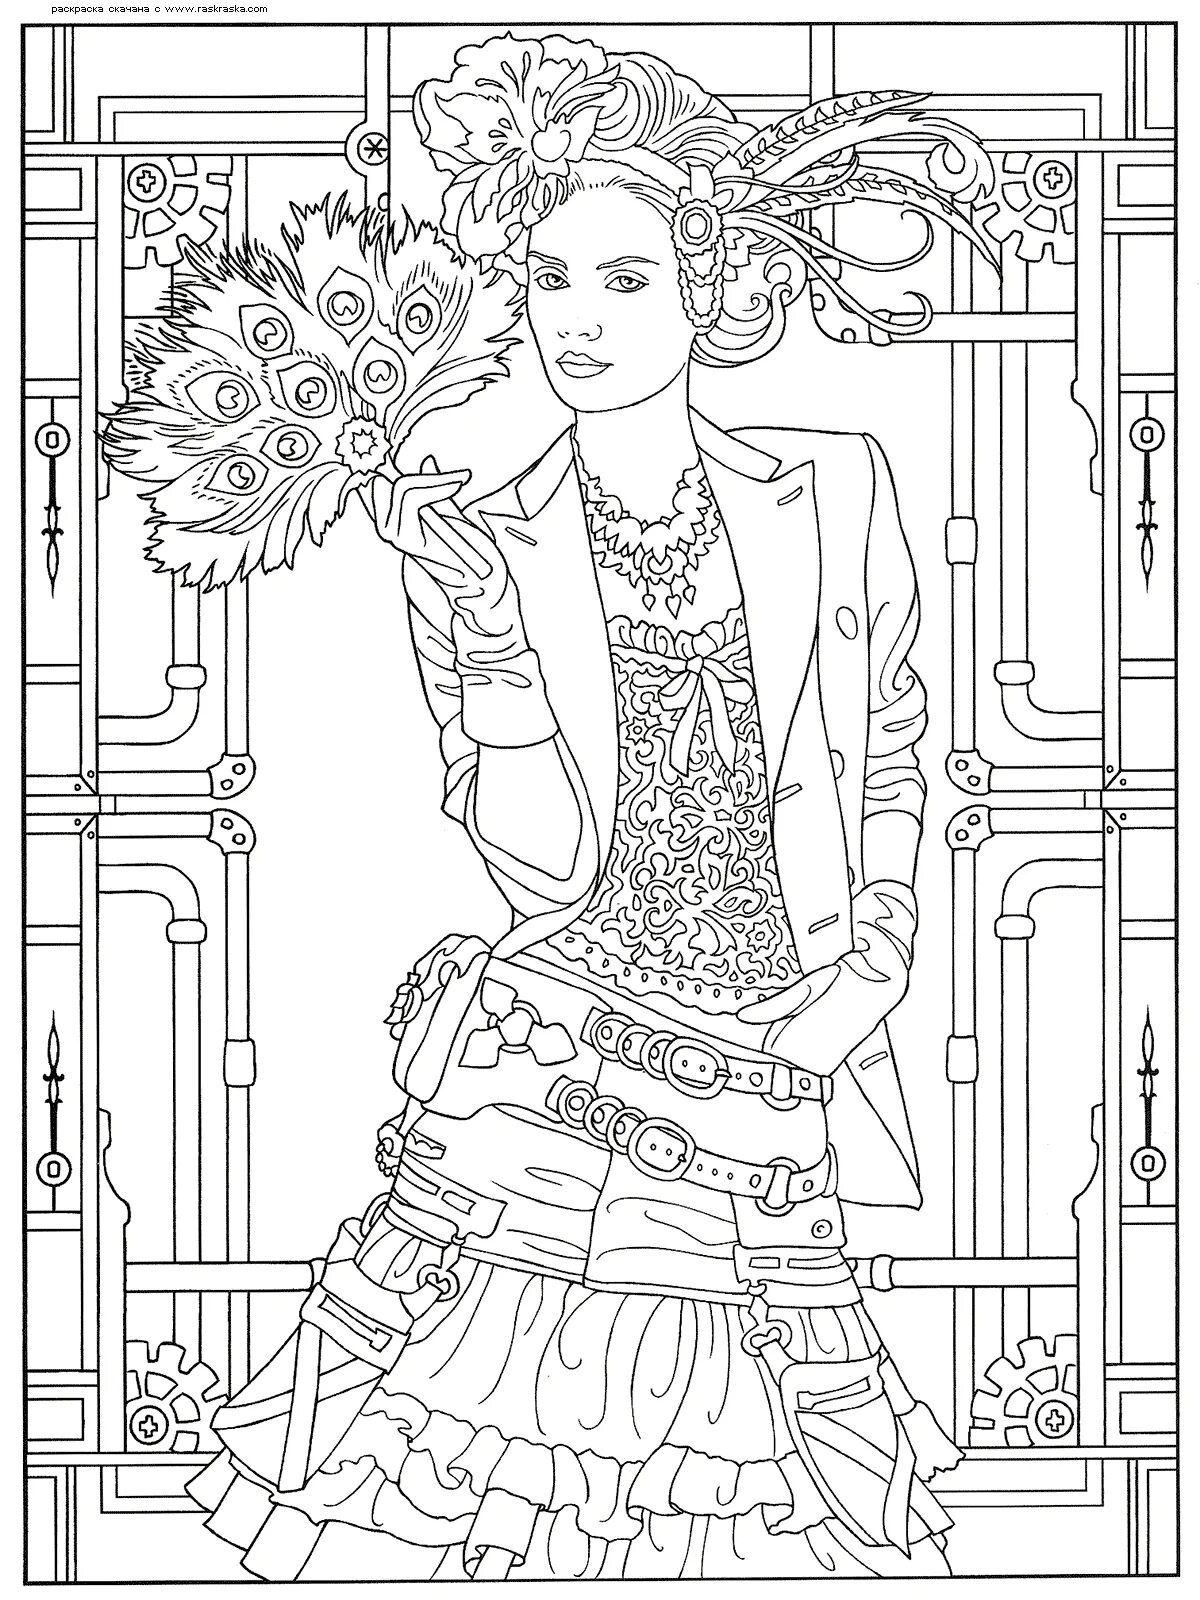 Intriguing steampunk coloring book